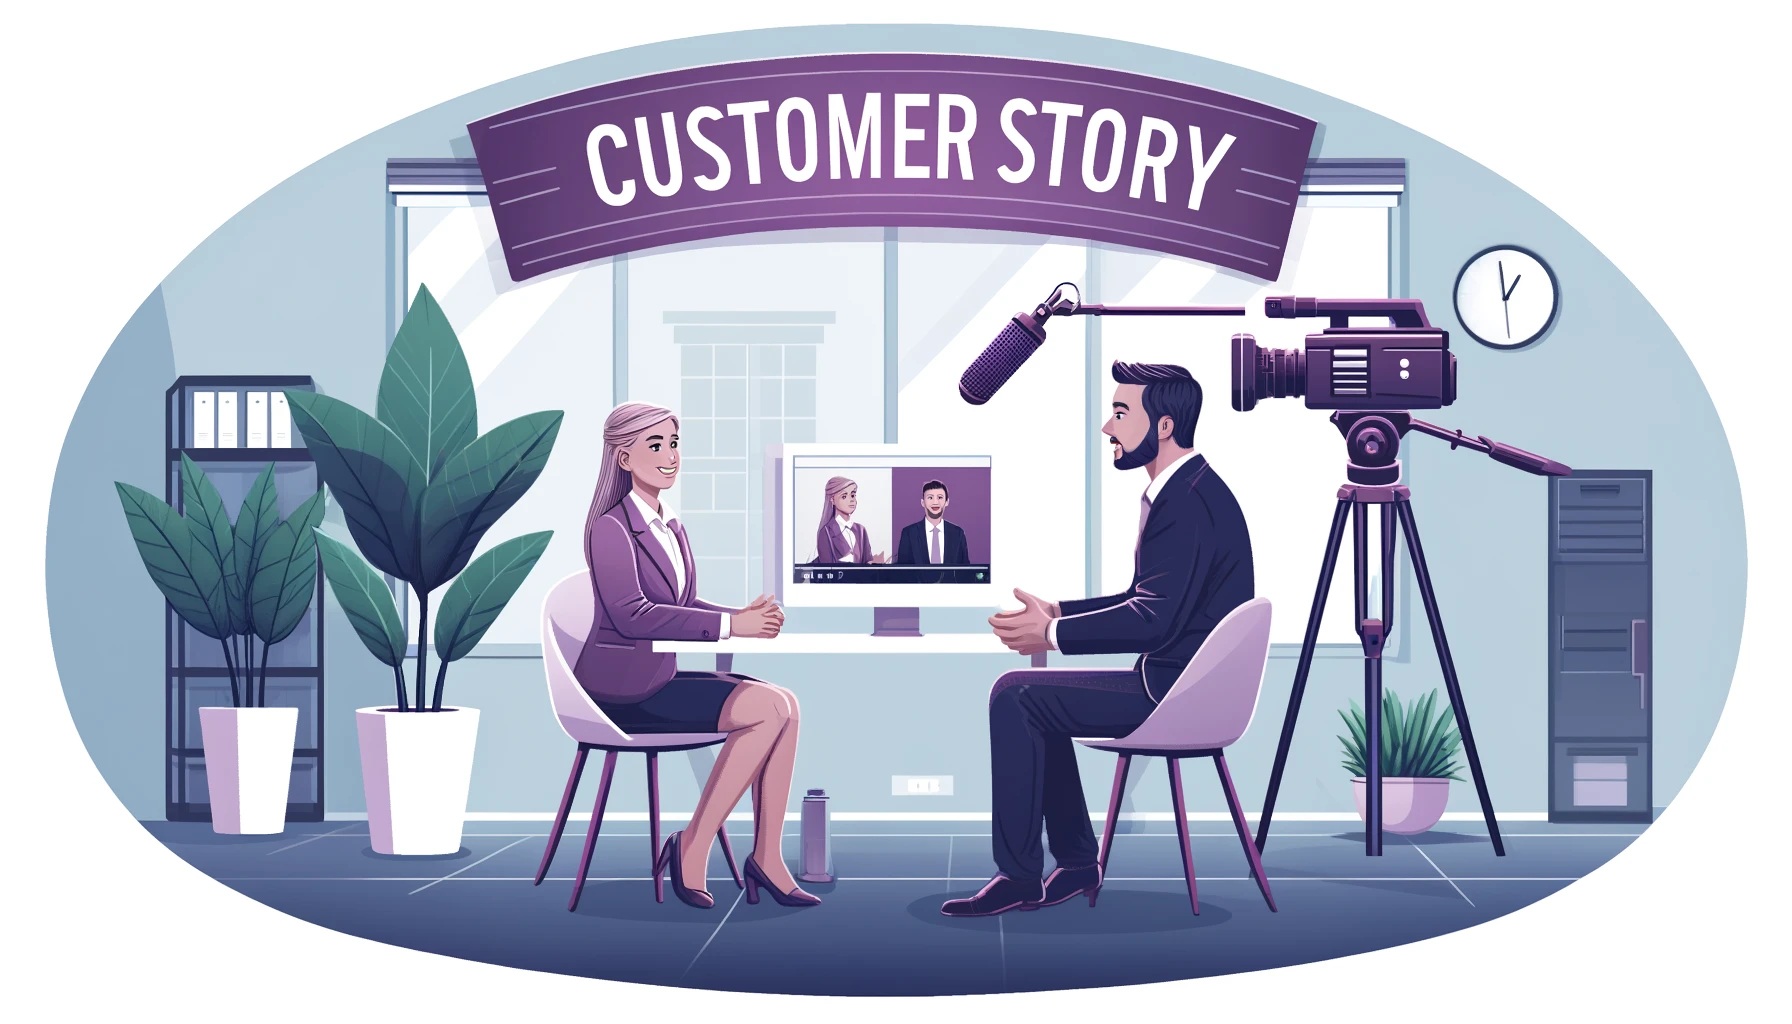 an-illustrated-style-image-in-a-16_9-format-depicting-a-professional-video-production-scene-for-a-customer-story